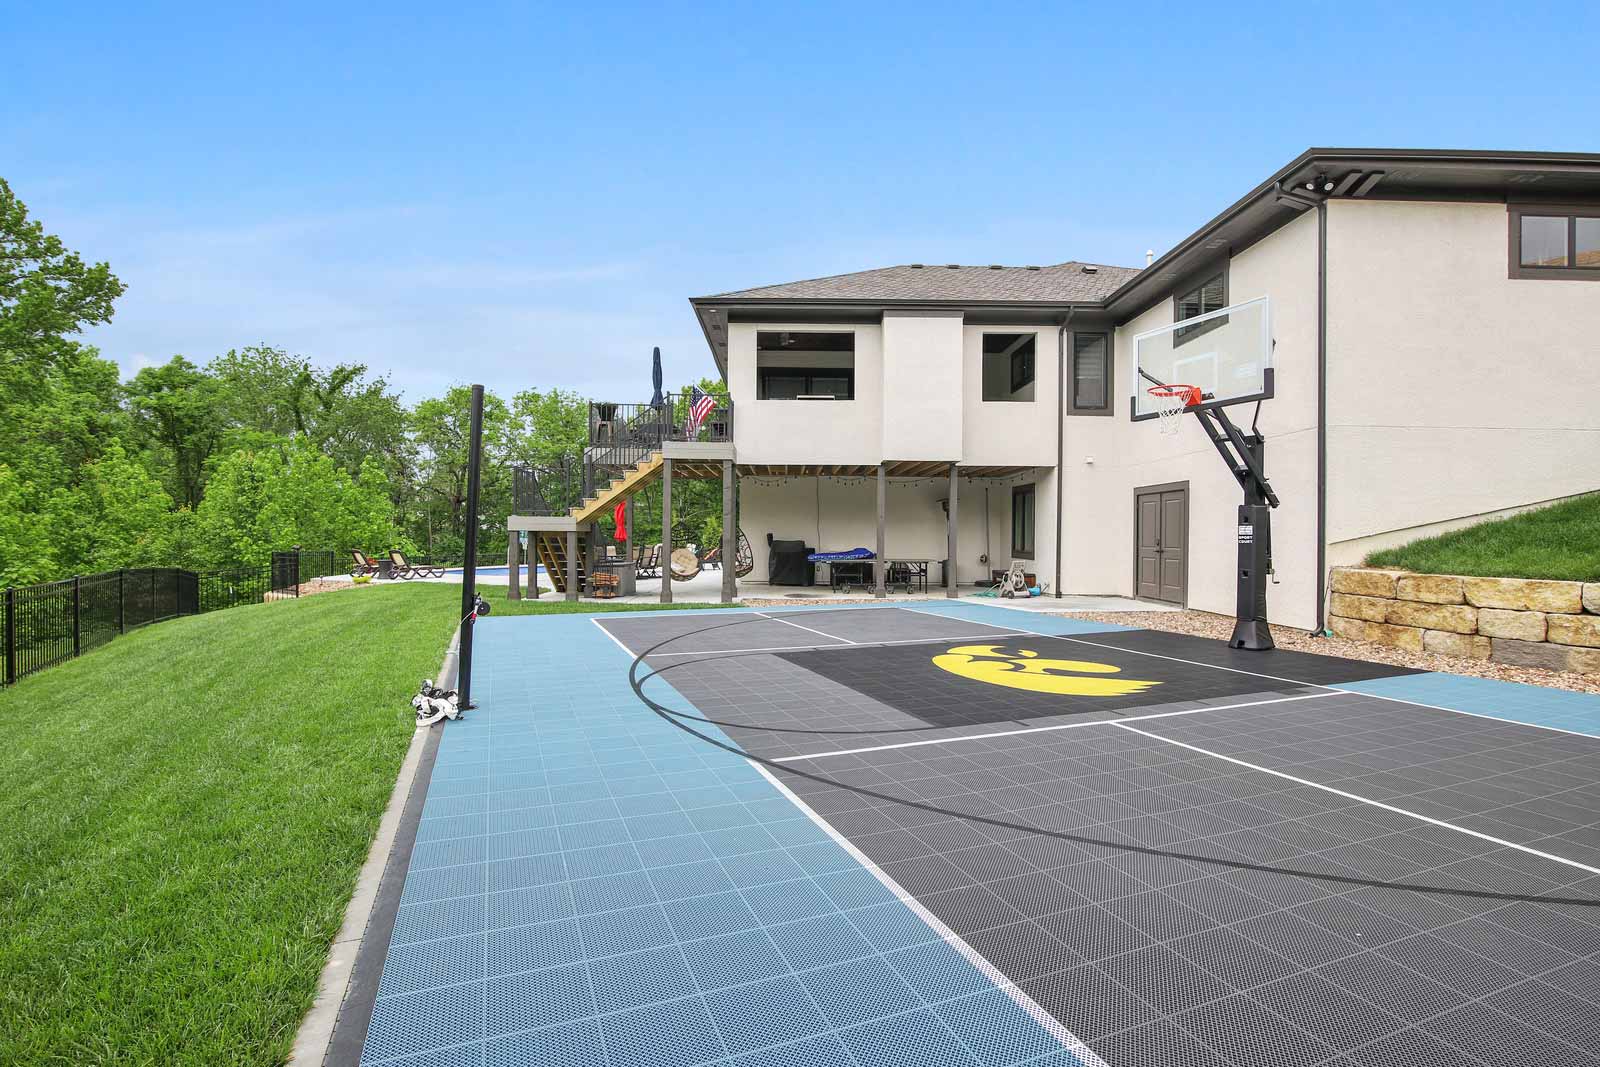 Backyard of Kenneth Estates home with basketball court